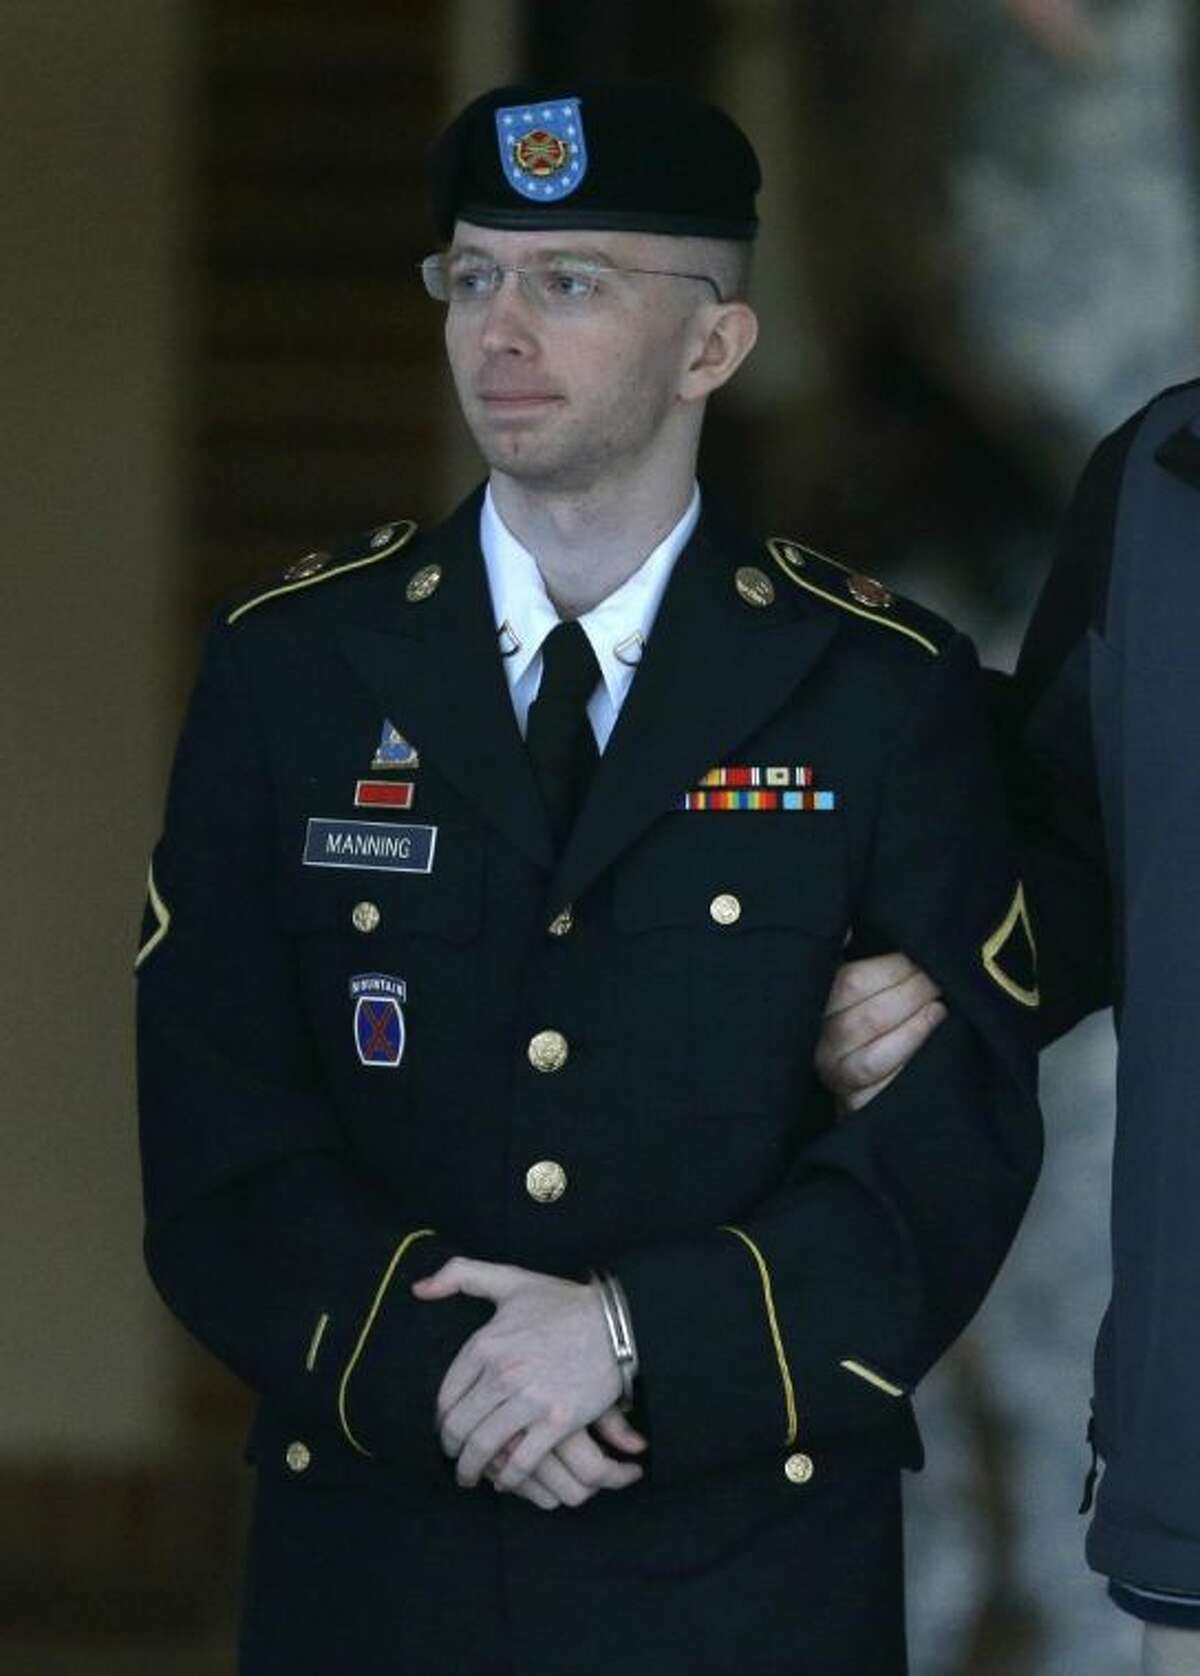 In this Monday, July 29, 2013 file photo, Army Pfc. Bradley Manning is escorted to a security vehicle outside of a courthouse in Fort Meade, Md. after the third day of deliberations in his court martial. US Army Pfc Bradley Manning was acquitted Tuesday, July 30, 2013 of aiding the enemy for giving secrets to WikiLeaks. Manning was convicted on espionage counts realted to the WikiLeaks case.